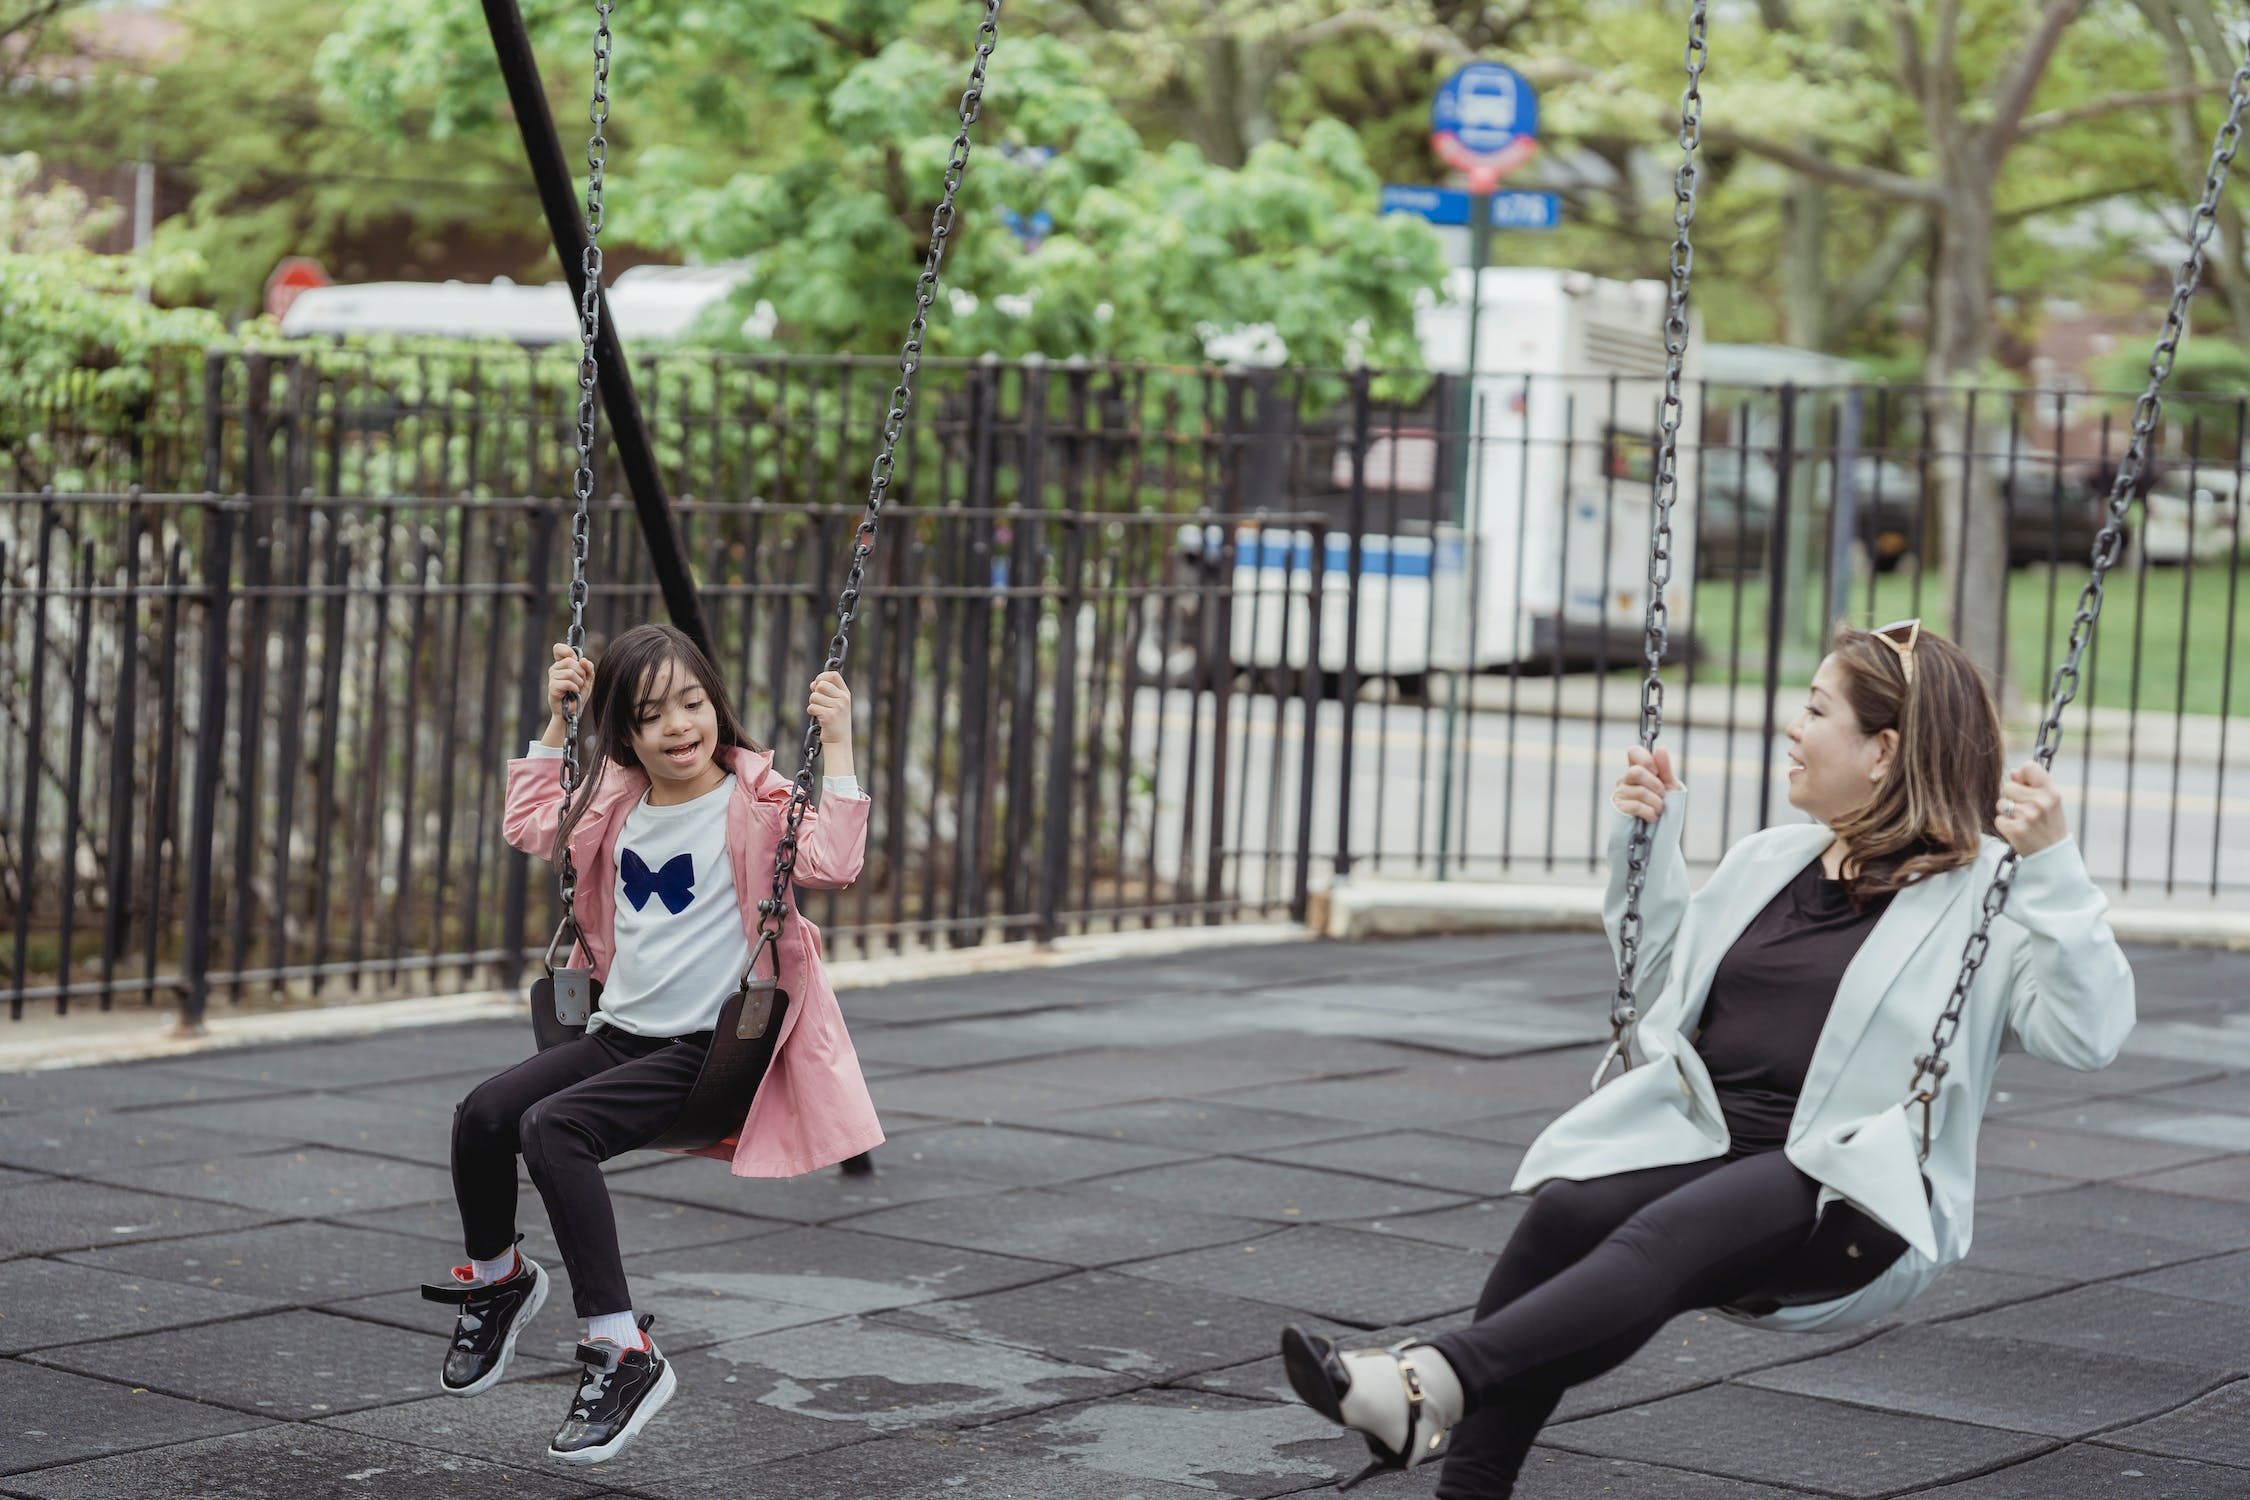 Mother and daughter on swings